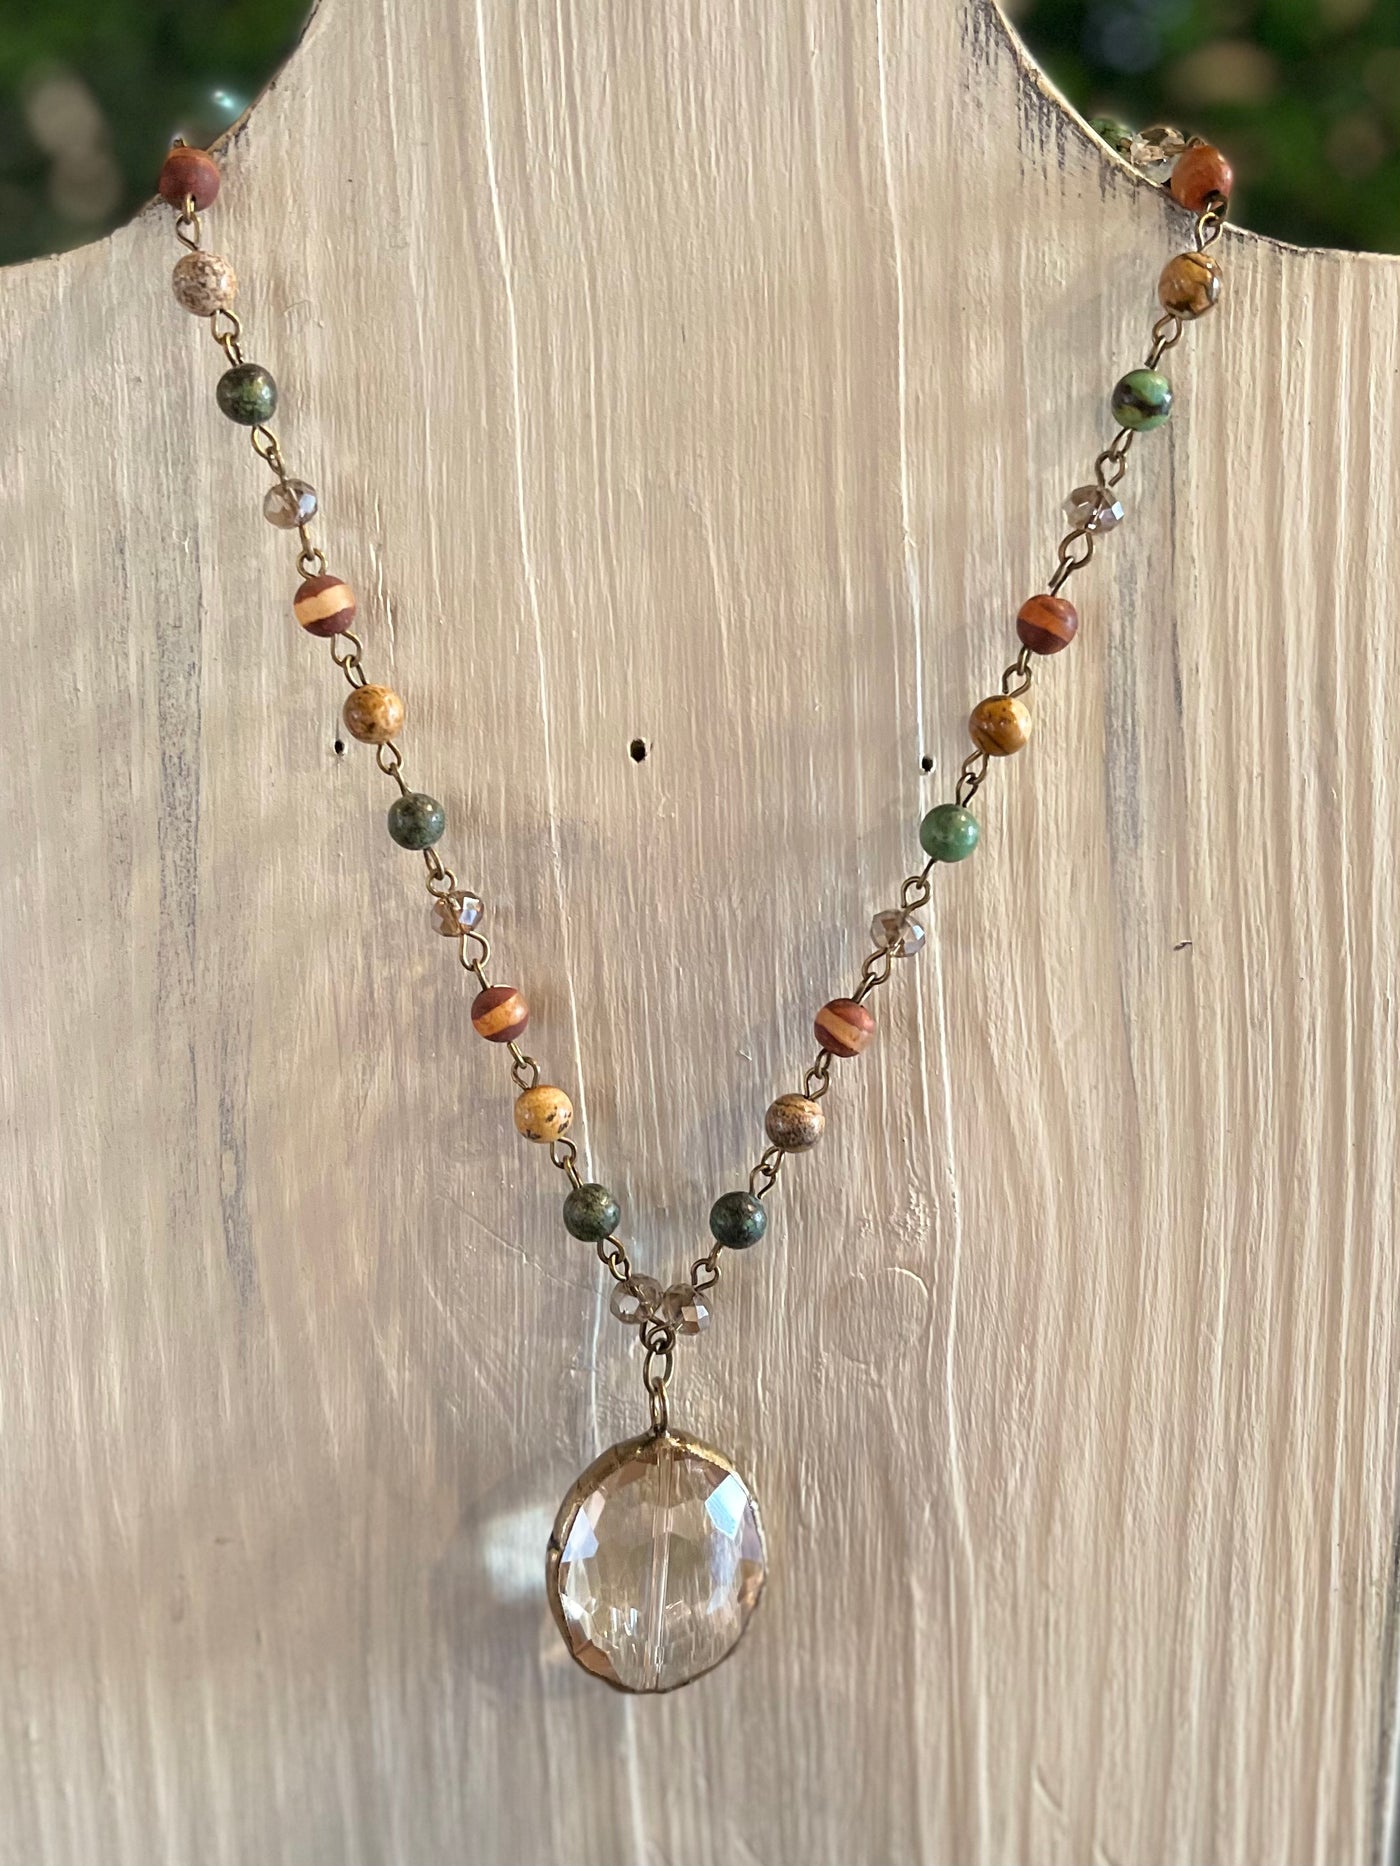 Natural Stone Beaded Necklace with Crystal Pendant